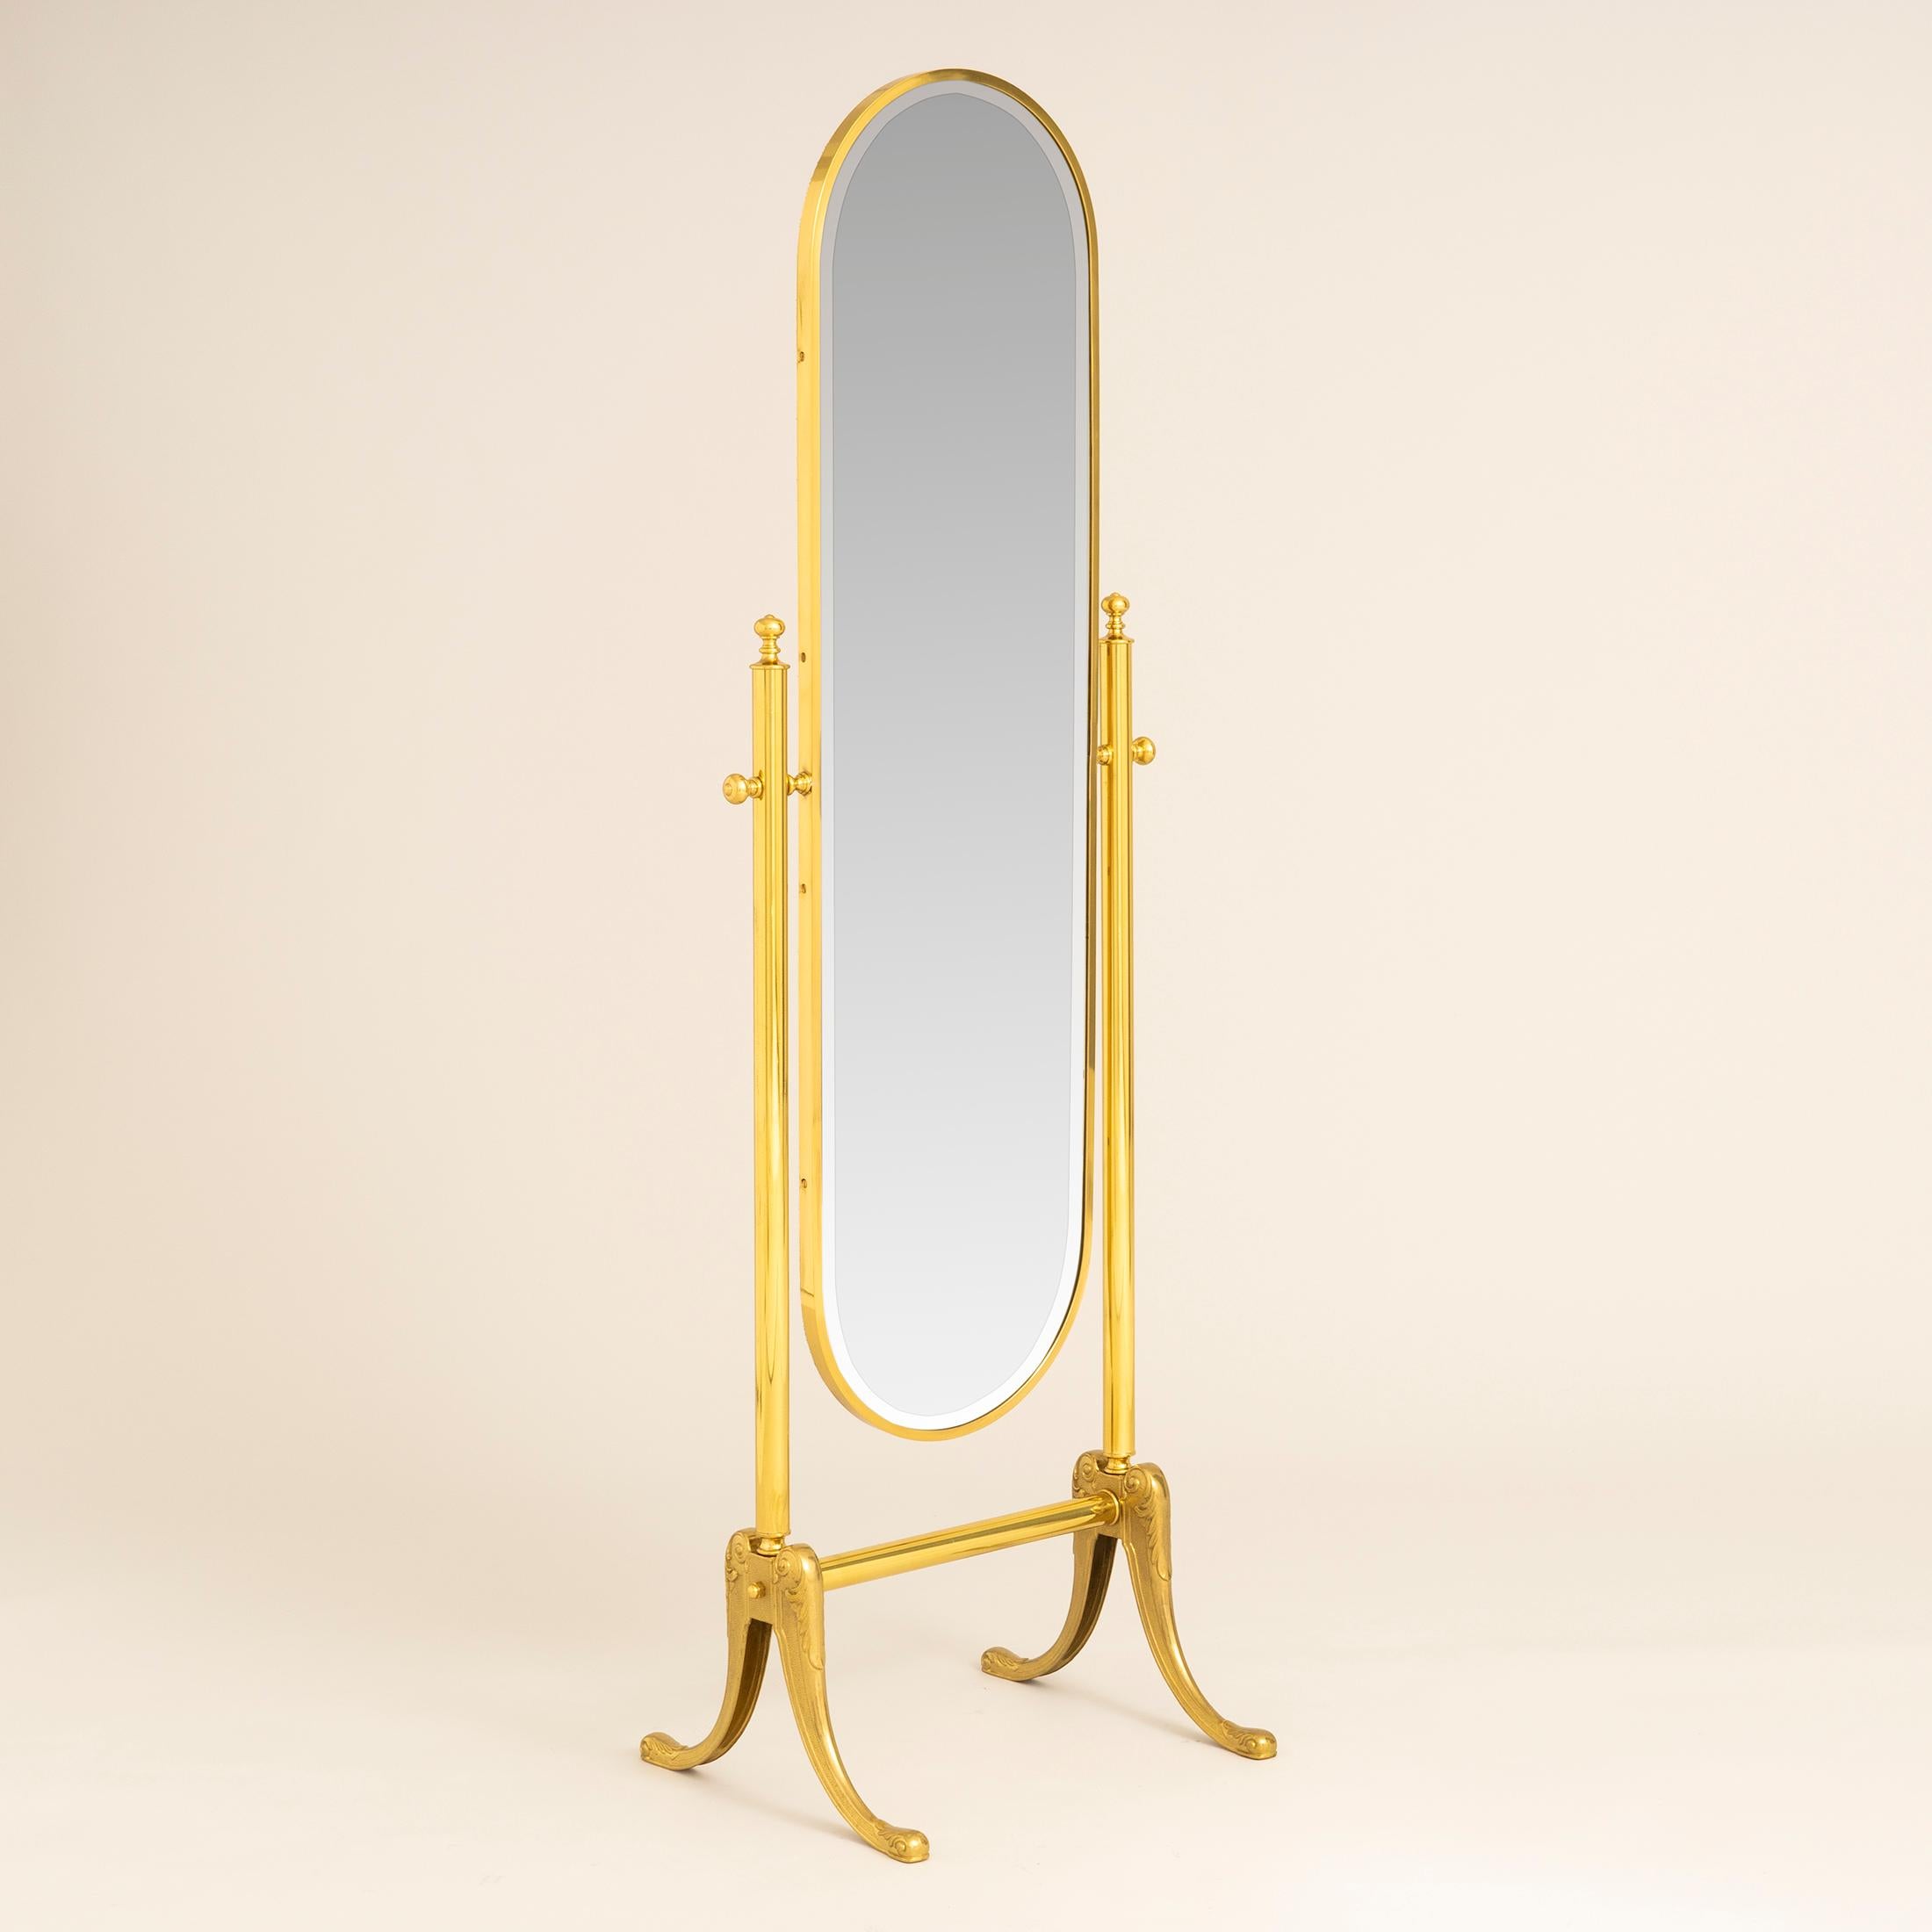 Rass full-length adjustable bevelled glass mirror with intricately-detailed cast brass splayed legs (see detailed image). Backed with green baize.